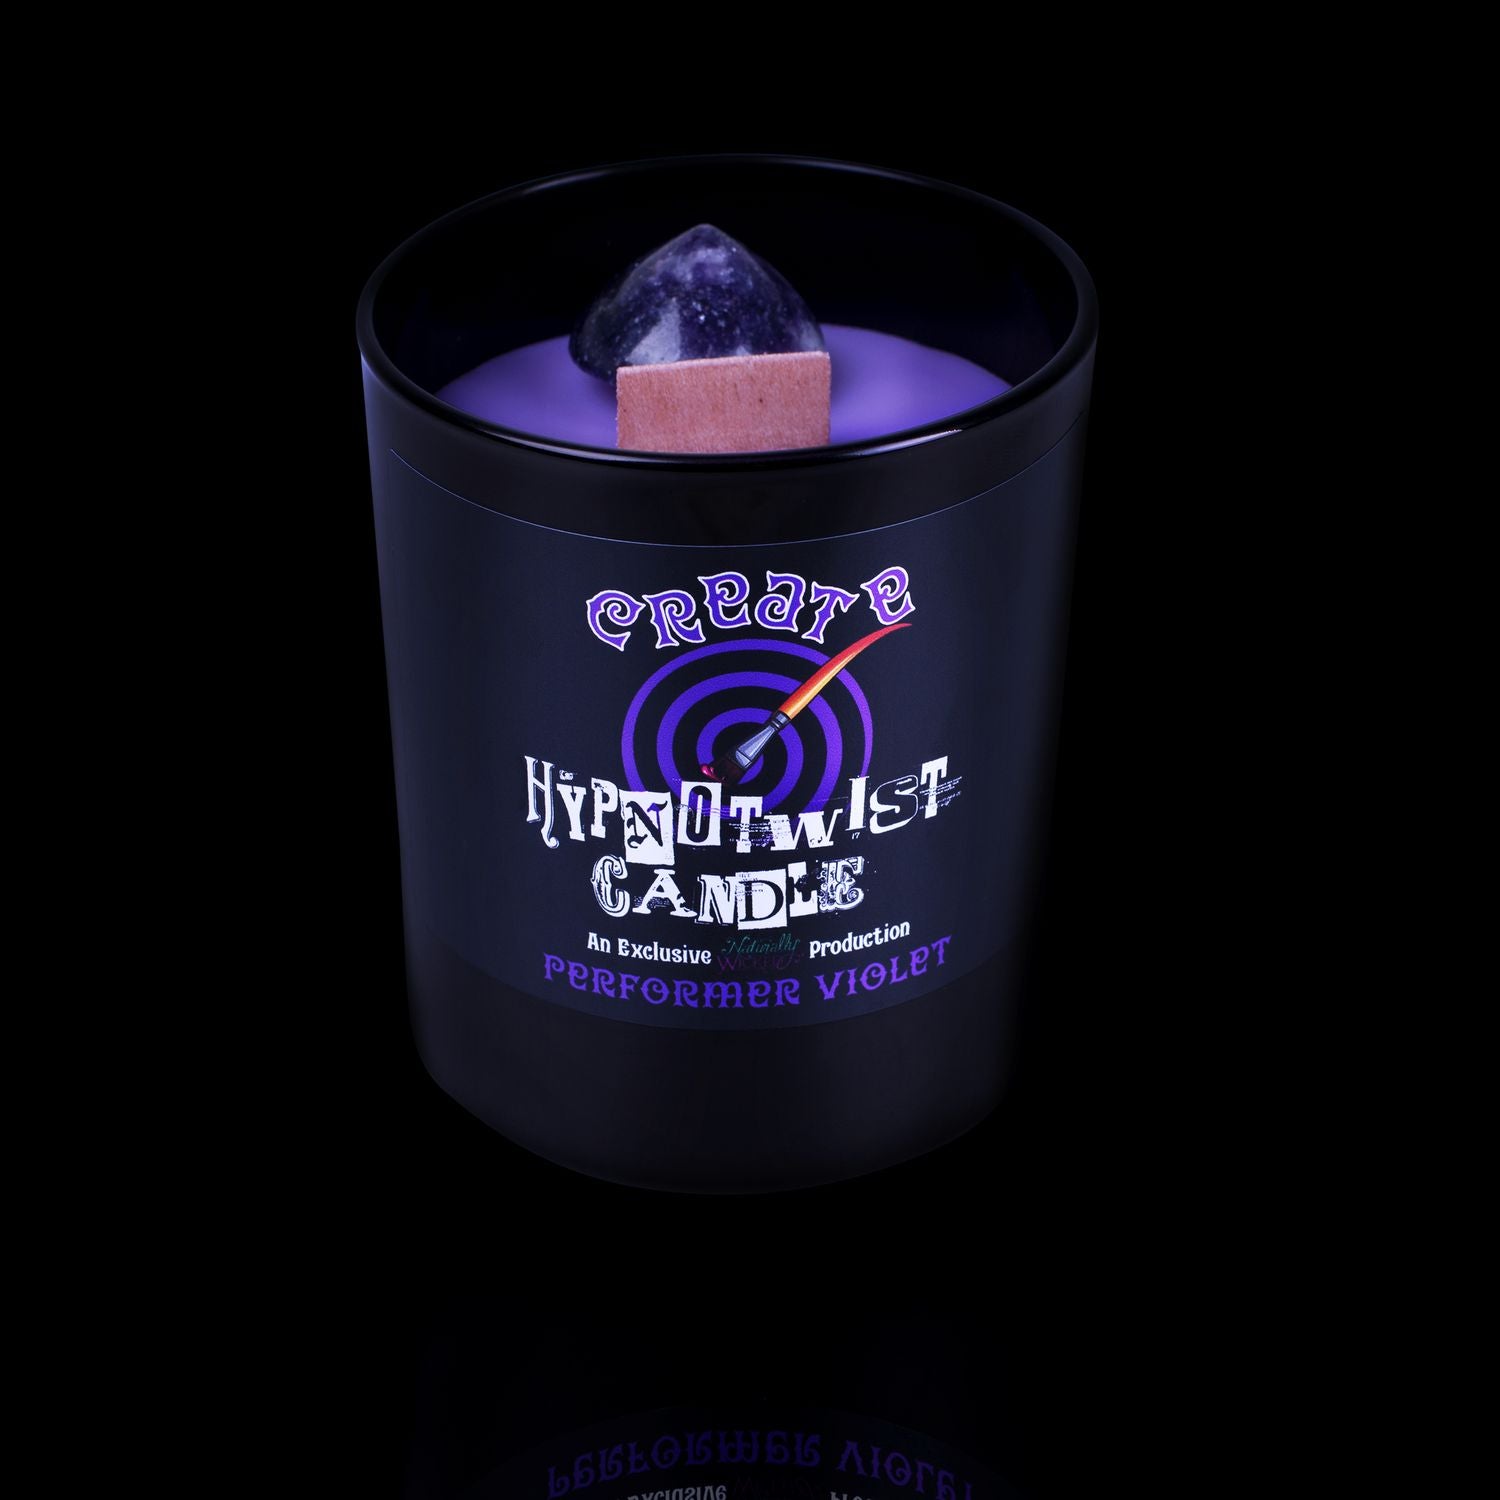 Naturally Wicked Hypnotwist Create Candle Featuring Plant-based Soy Purple Wax Scented with Performer Violet & Includes A Lepidolite Crystal Spinning Top.